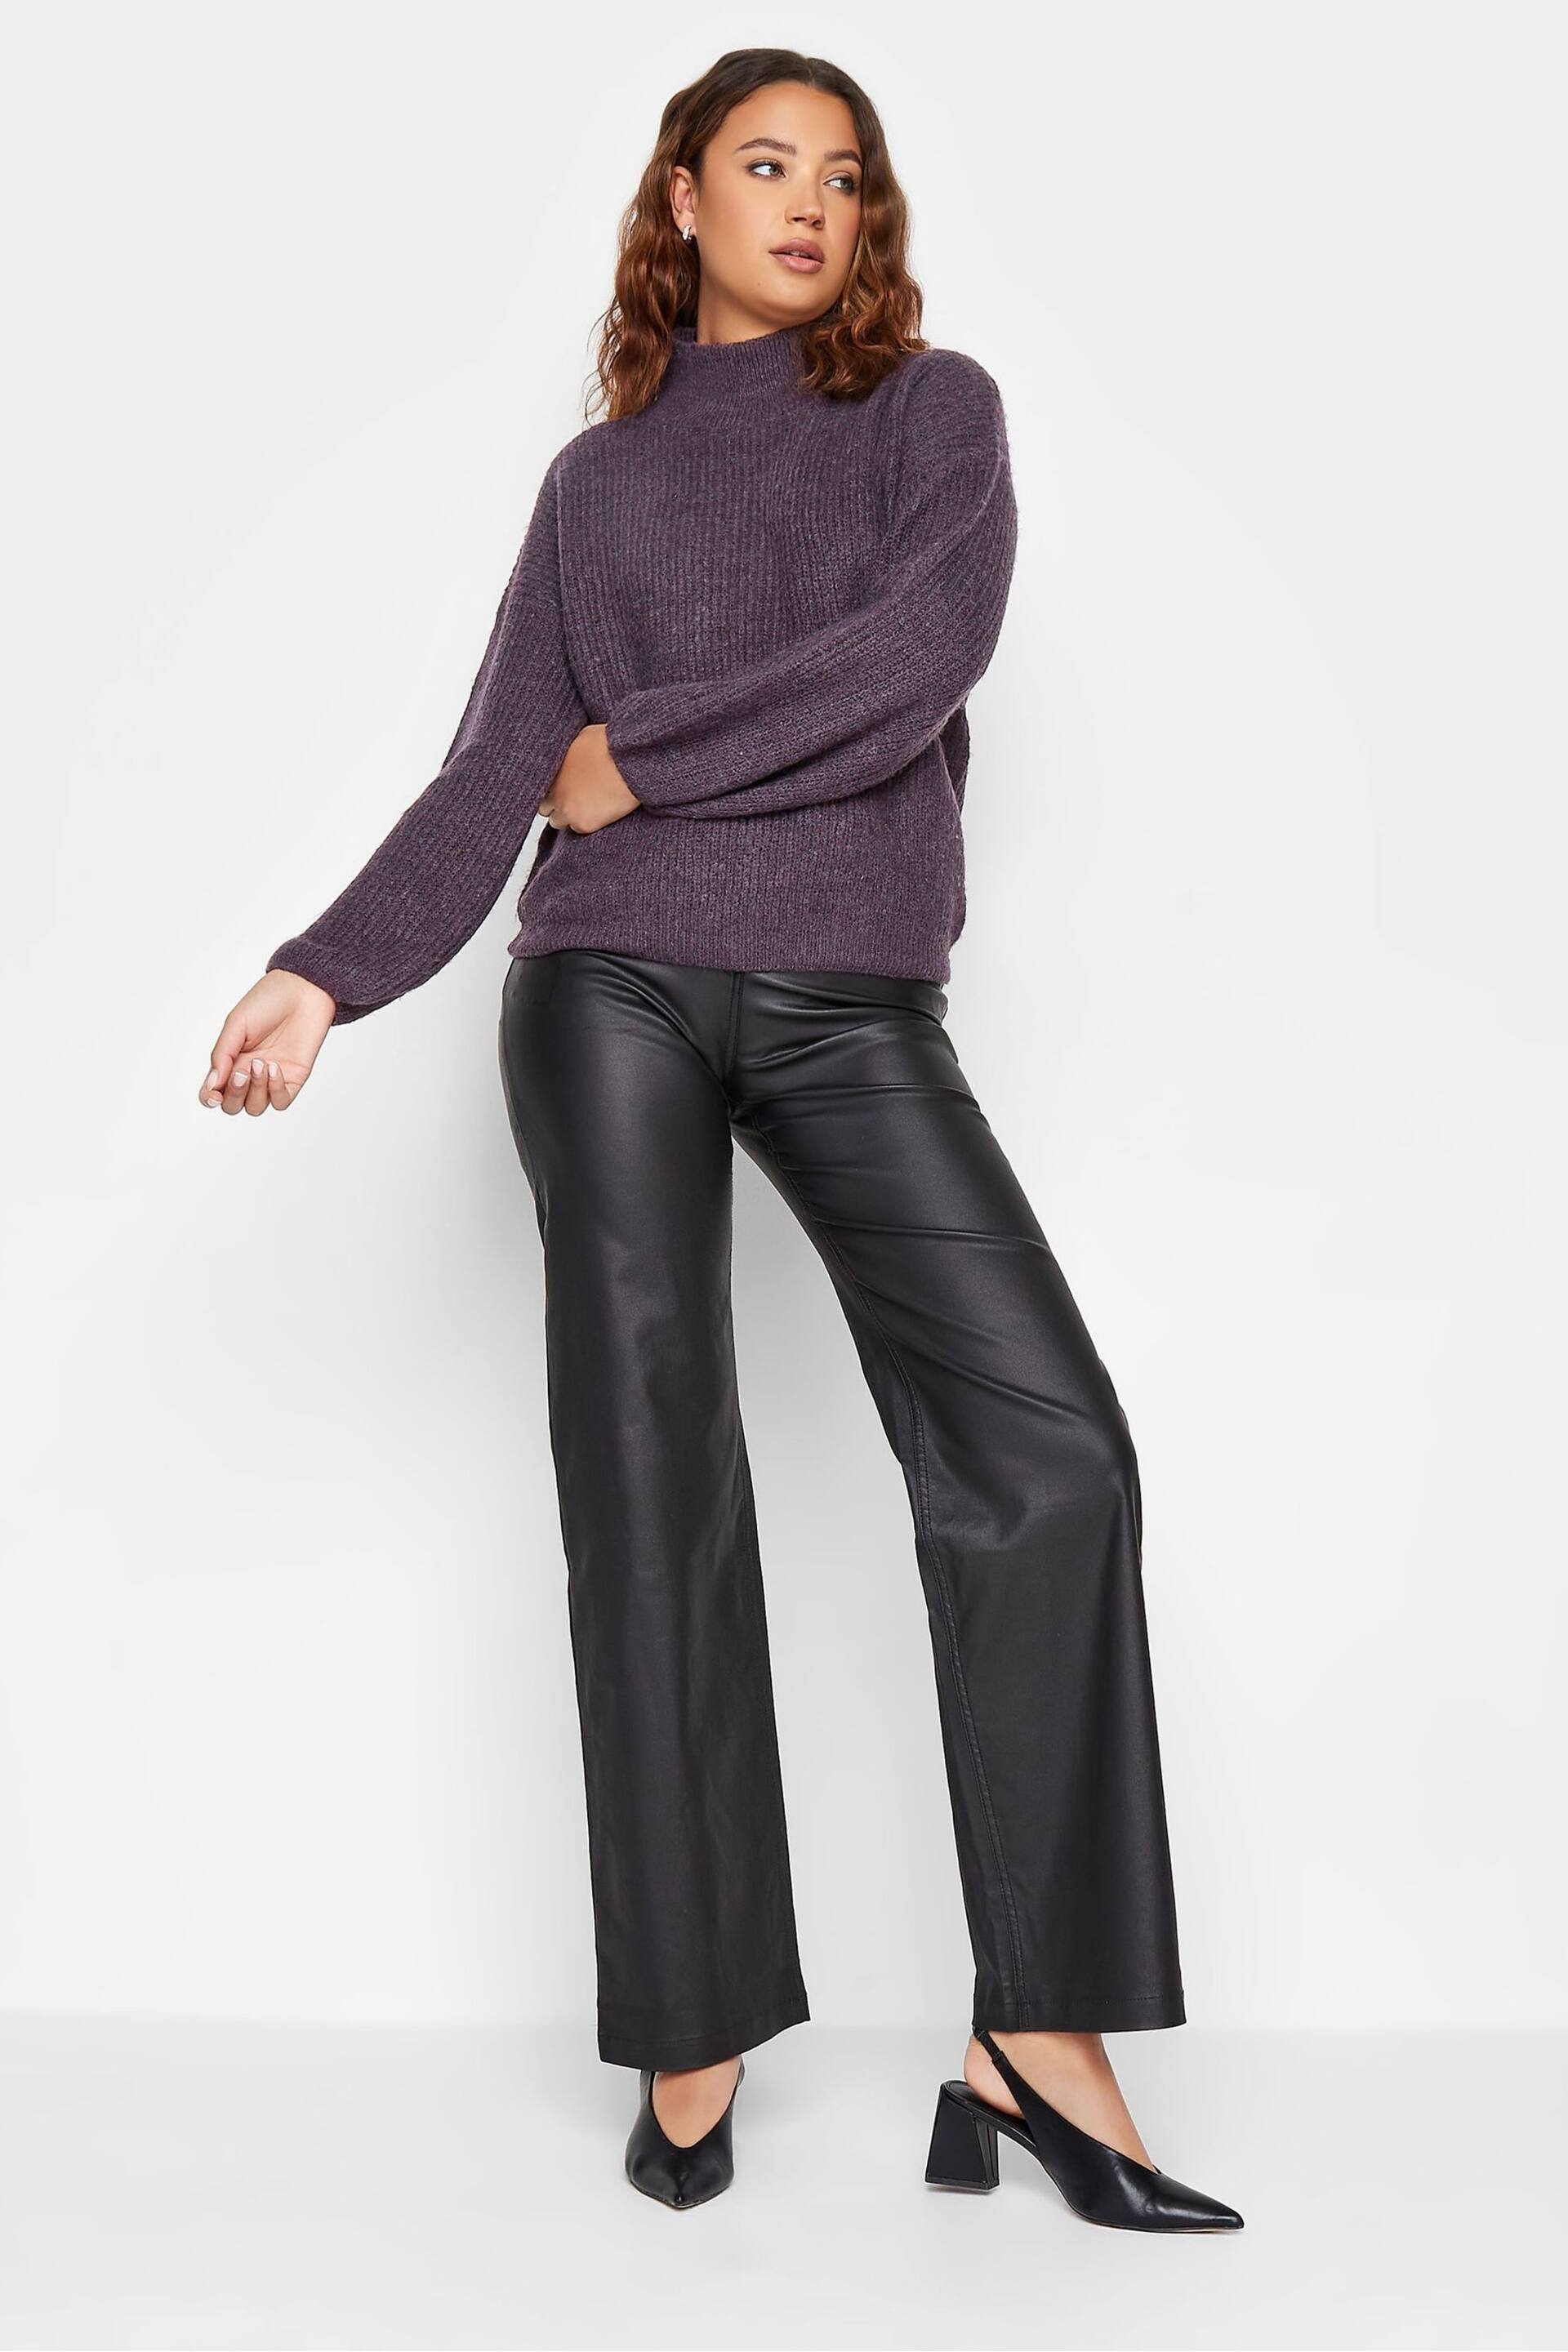 Long Tall Sally Purple Co-Ord Jumper - Image 1 of 4